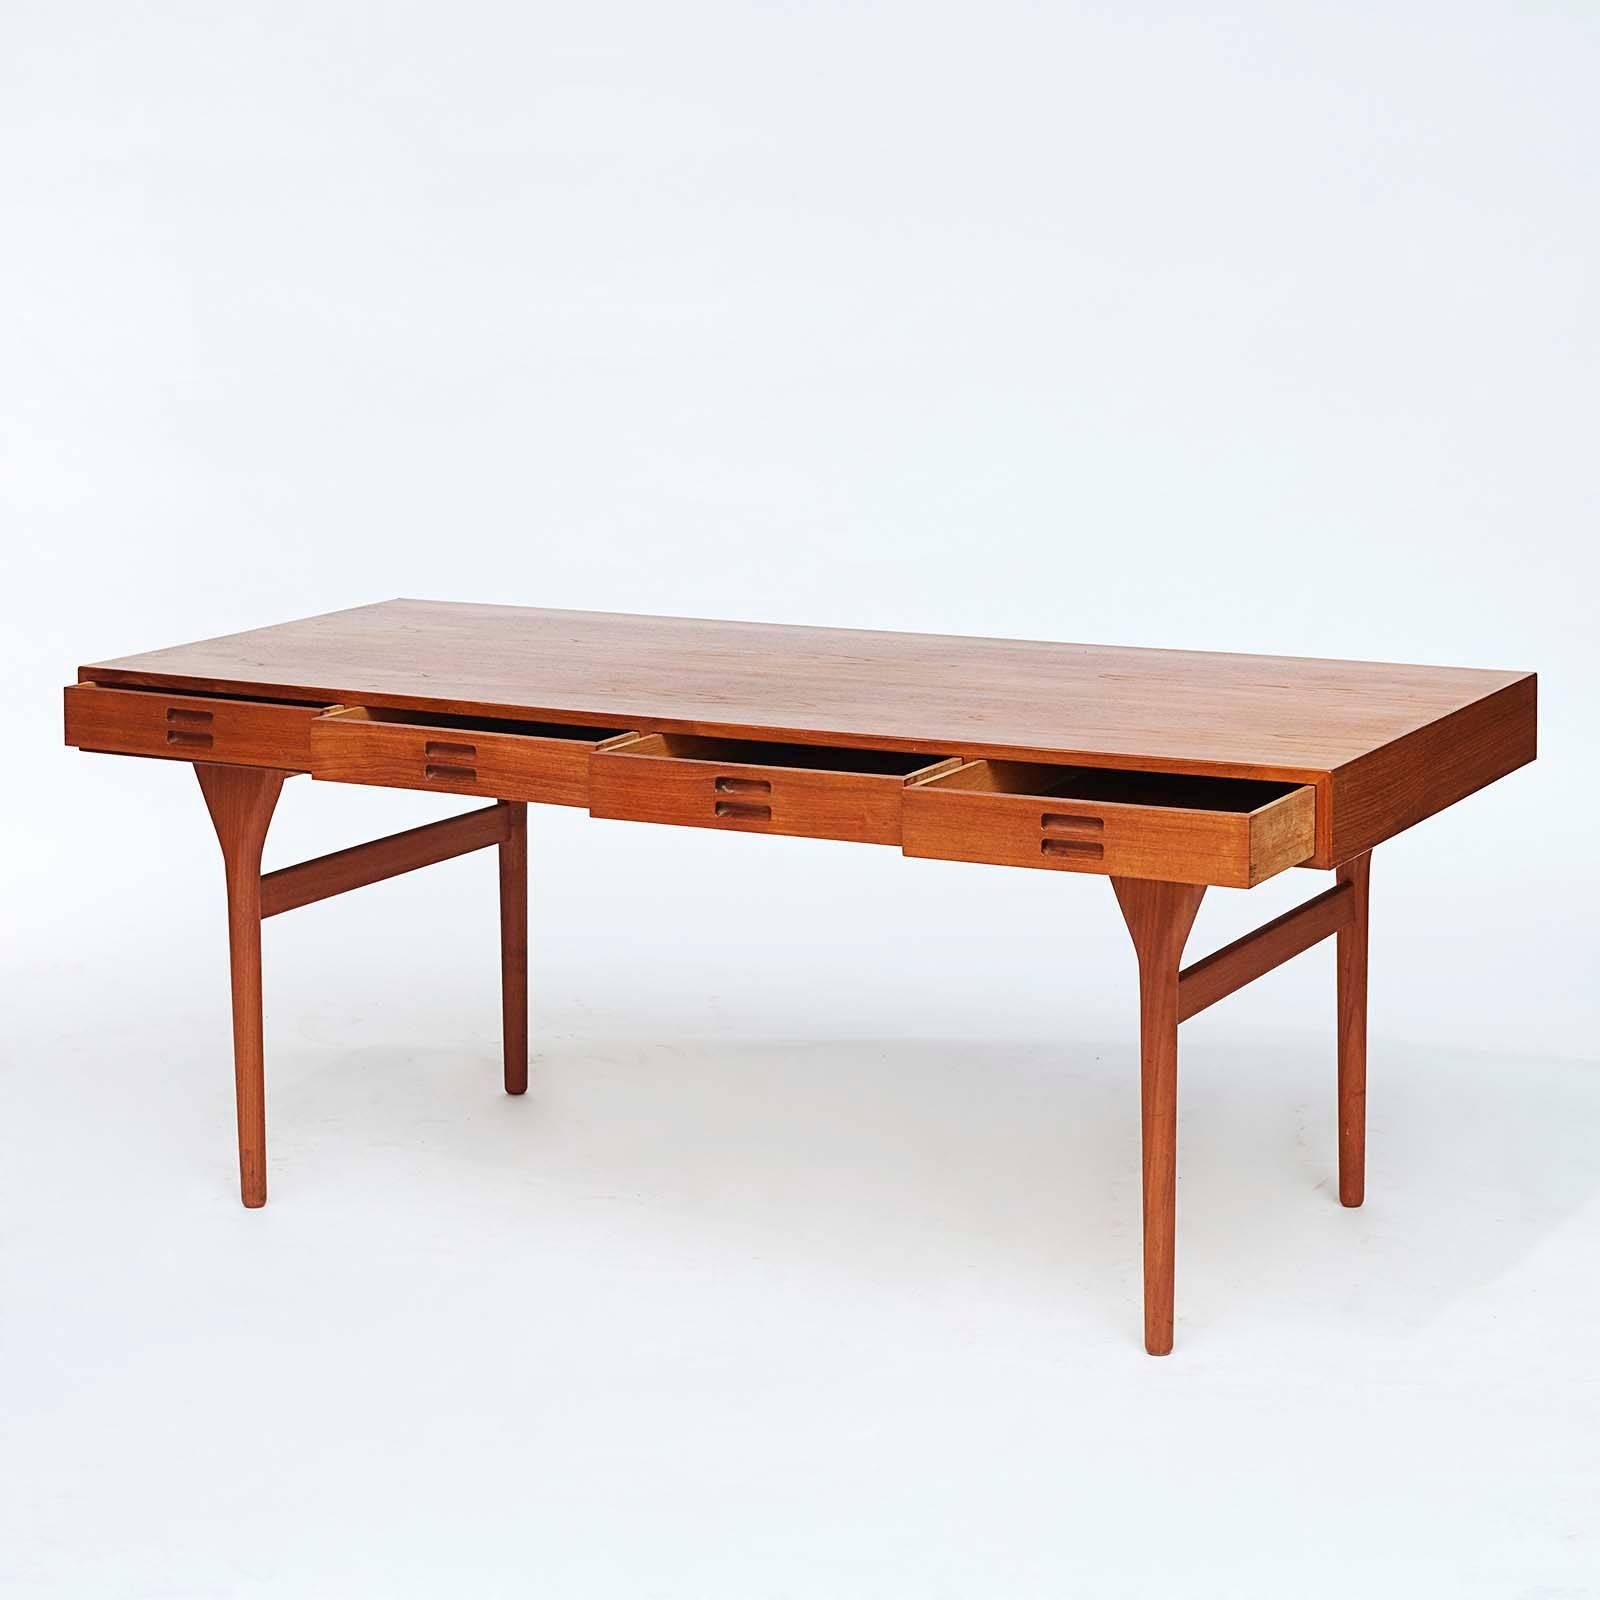 A Danish teakwood writing desk designed by Nanna Ditzel and produced by Søren Willadsen, Vejen, Model #93-4. Original design, circa 1958. The rectangular top with four frieze drawers with recessed drawer pulls, raised on circular tapering